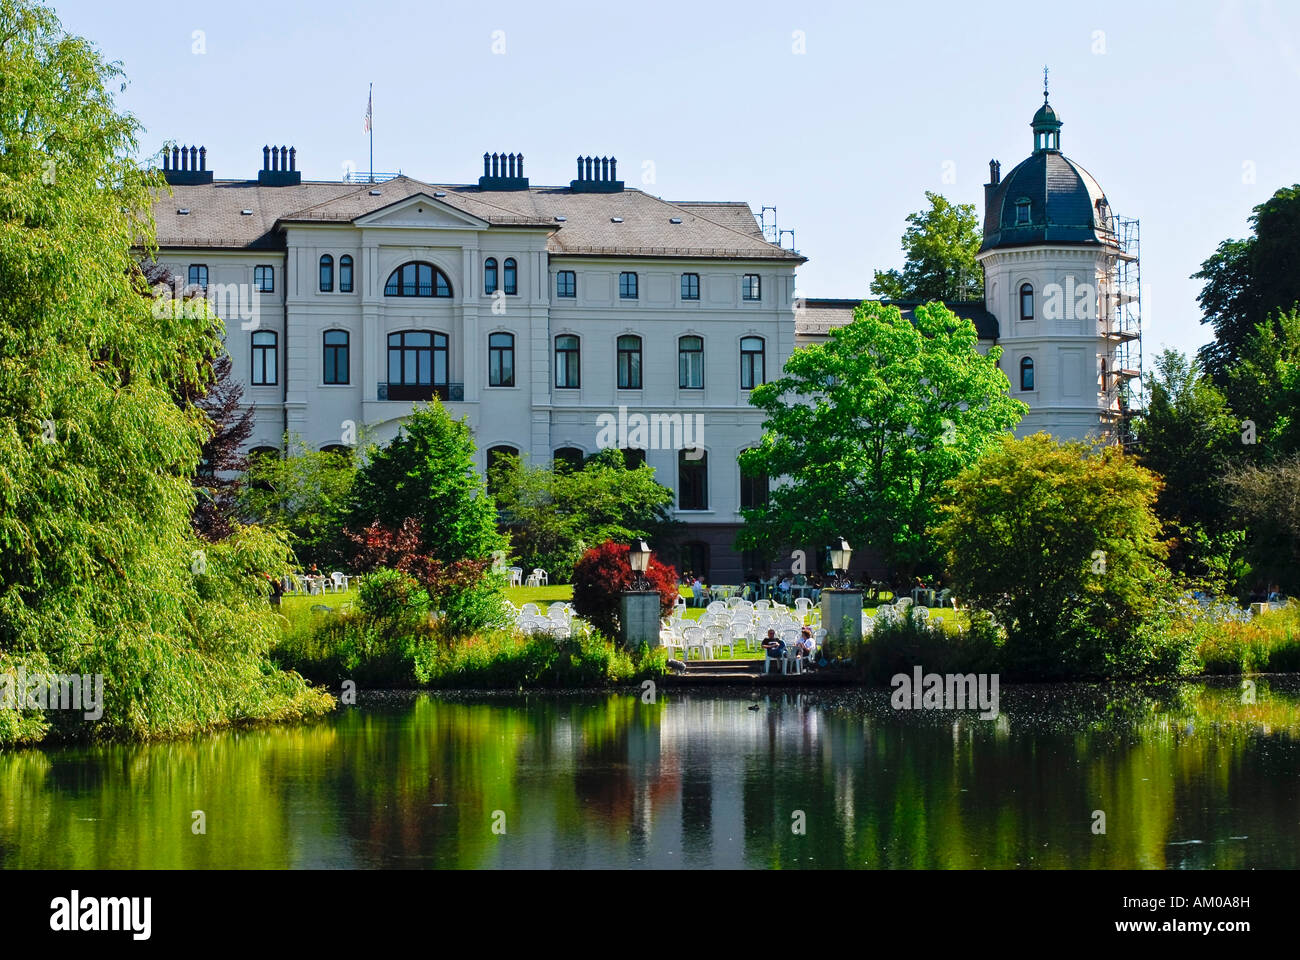 Culture-center of the federal state, Gut Salzau, Schleswig-Holstein, Germany Stock Photo